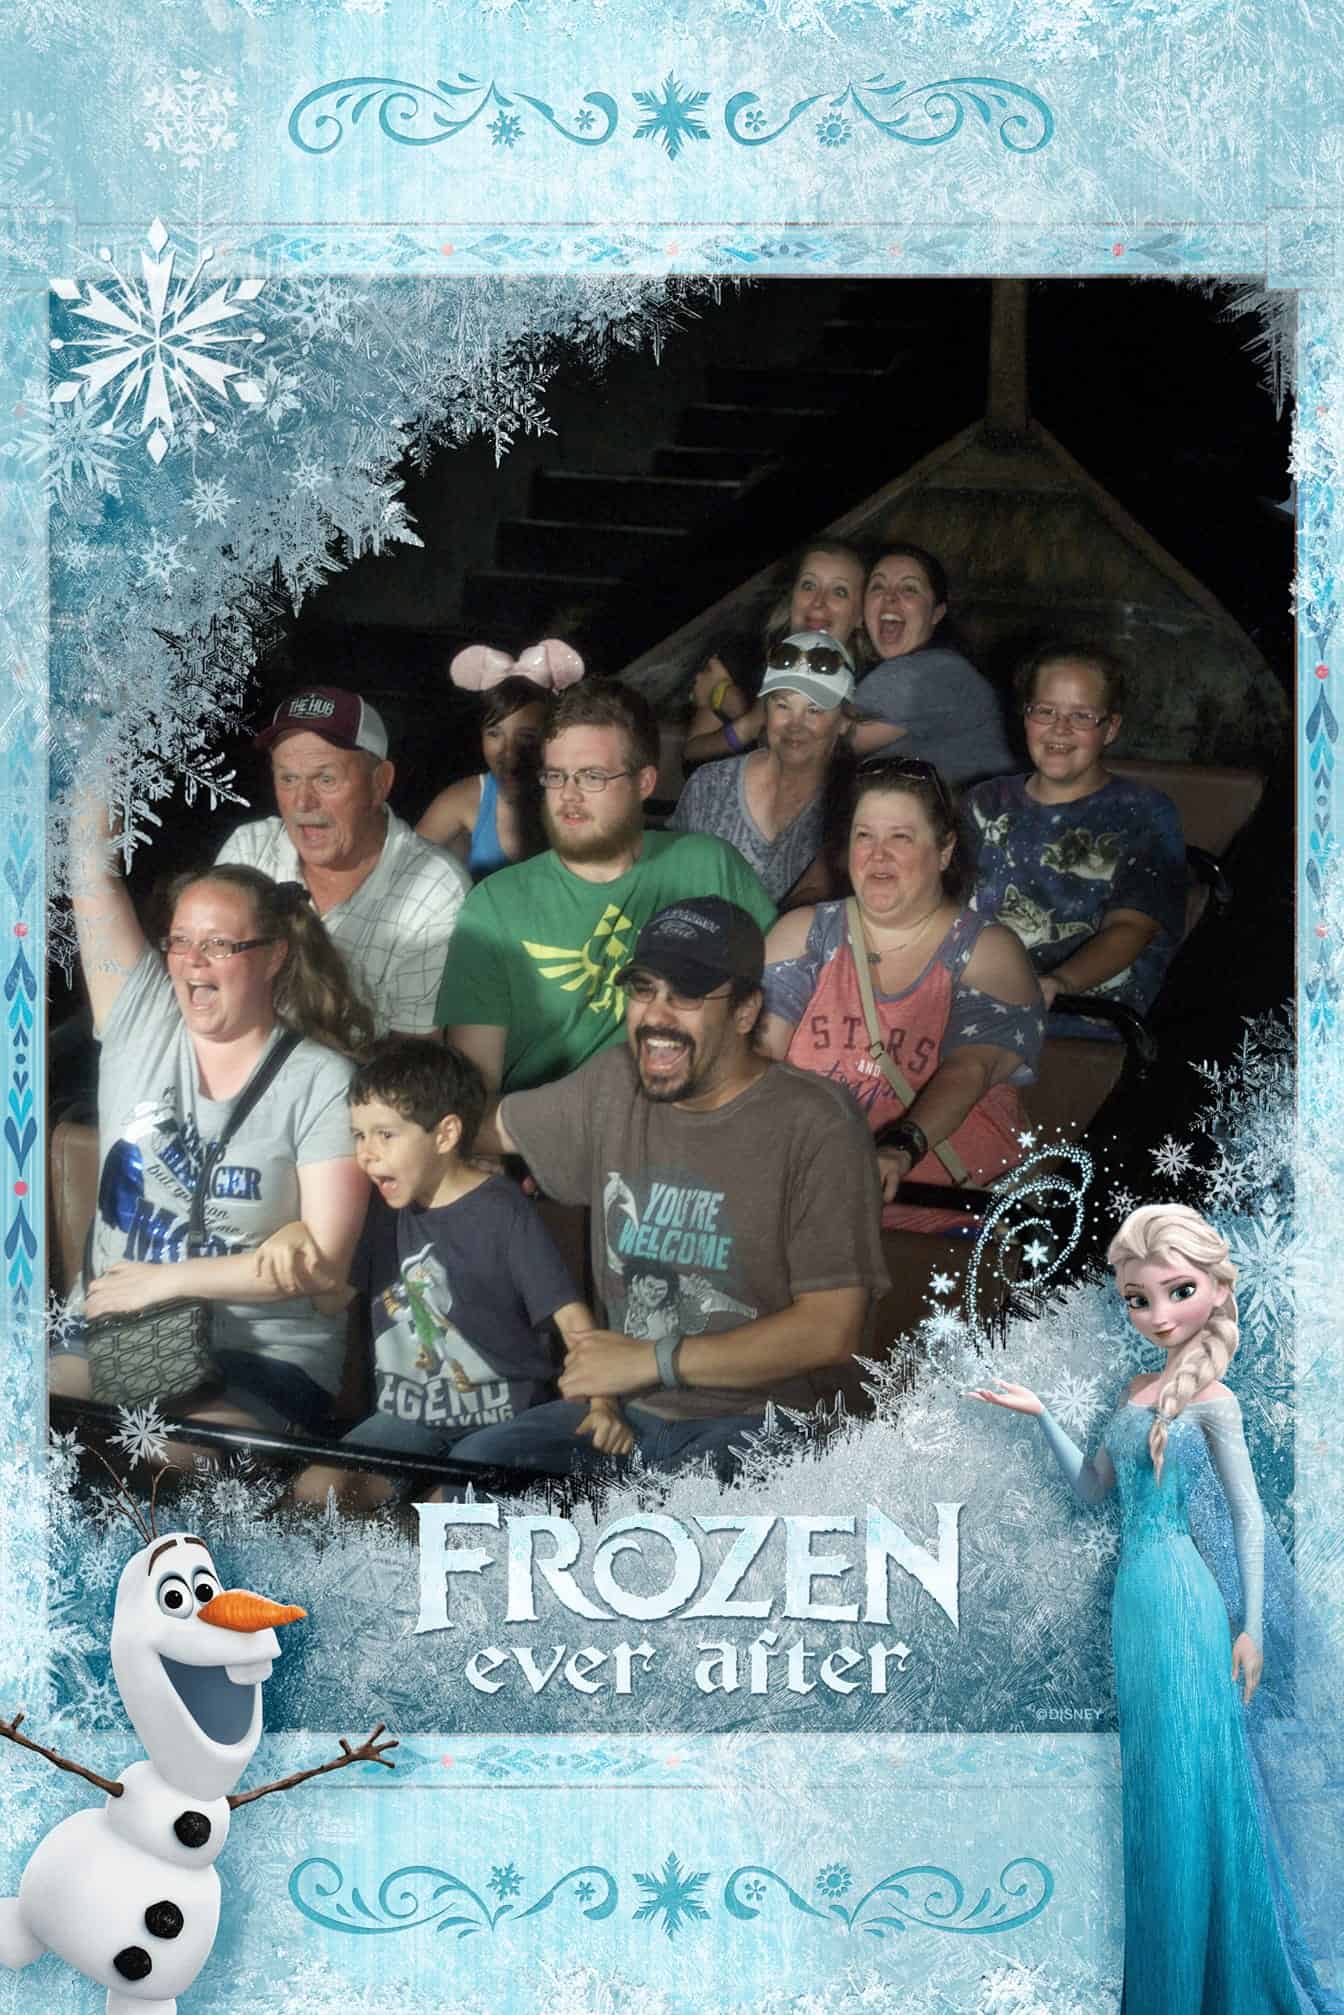 Ride photograph from Frozen Ever After ride at Disney's Epcot